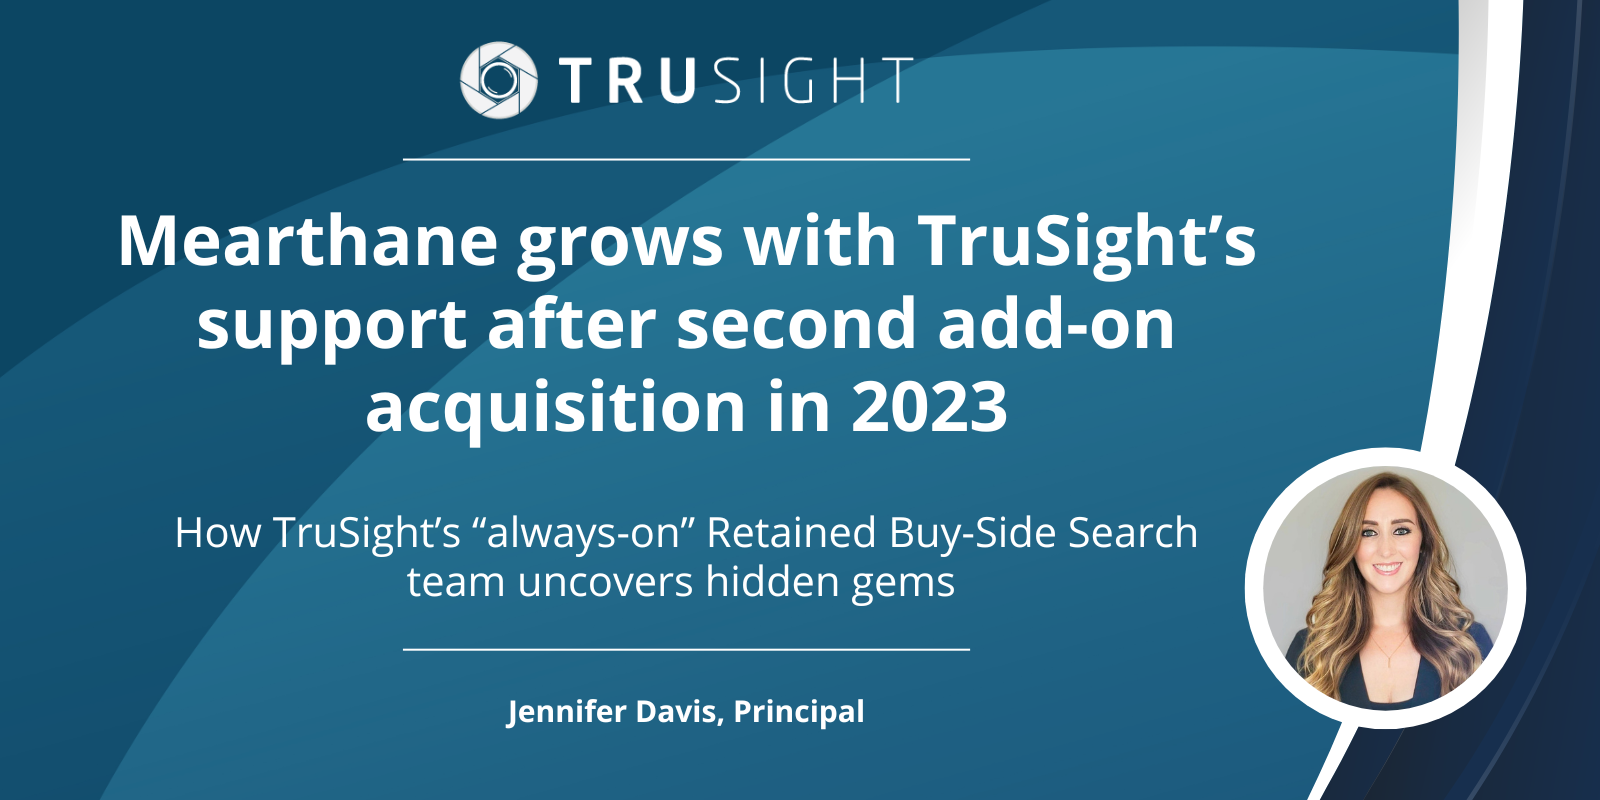 Mearthane grows with TruSight's support after second add-on acquisition in 2023